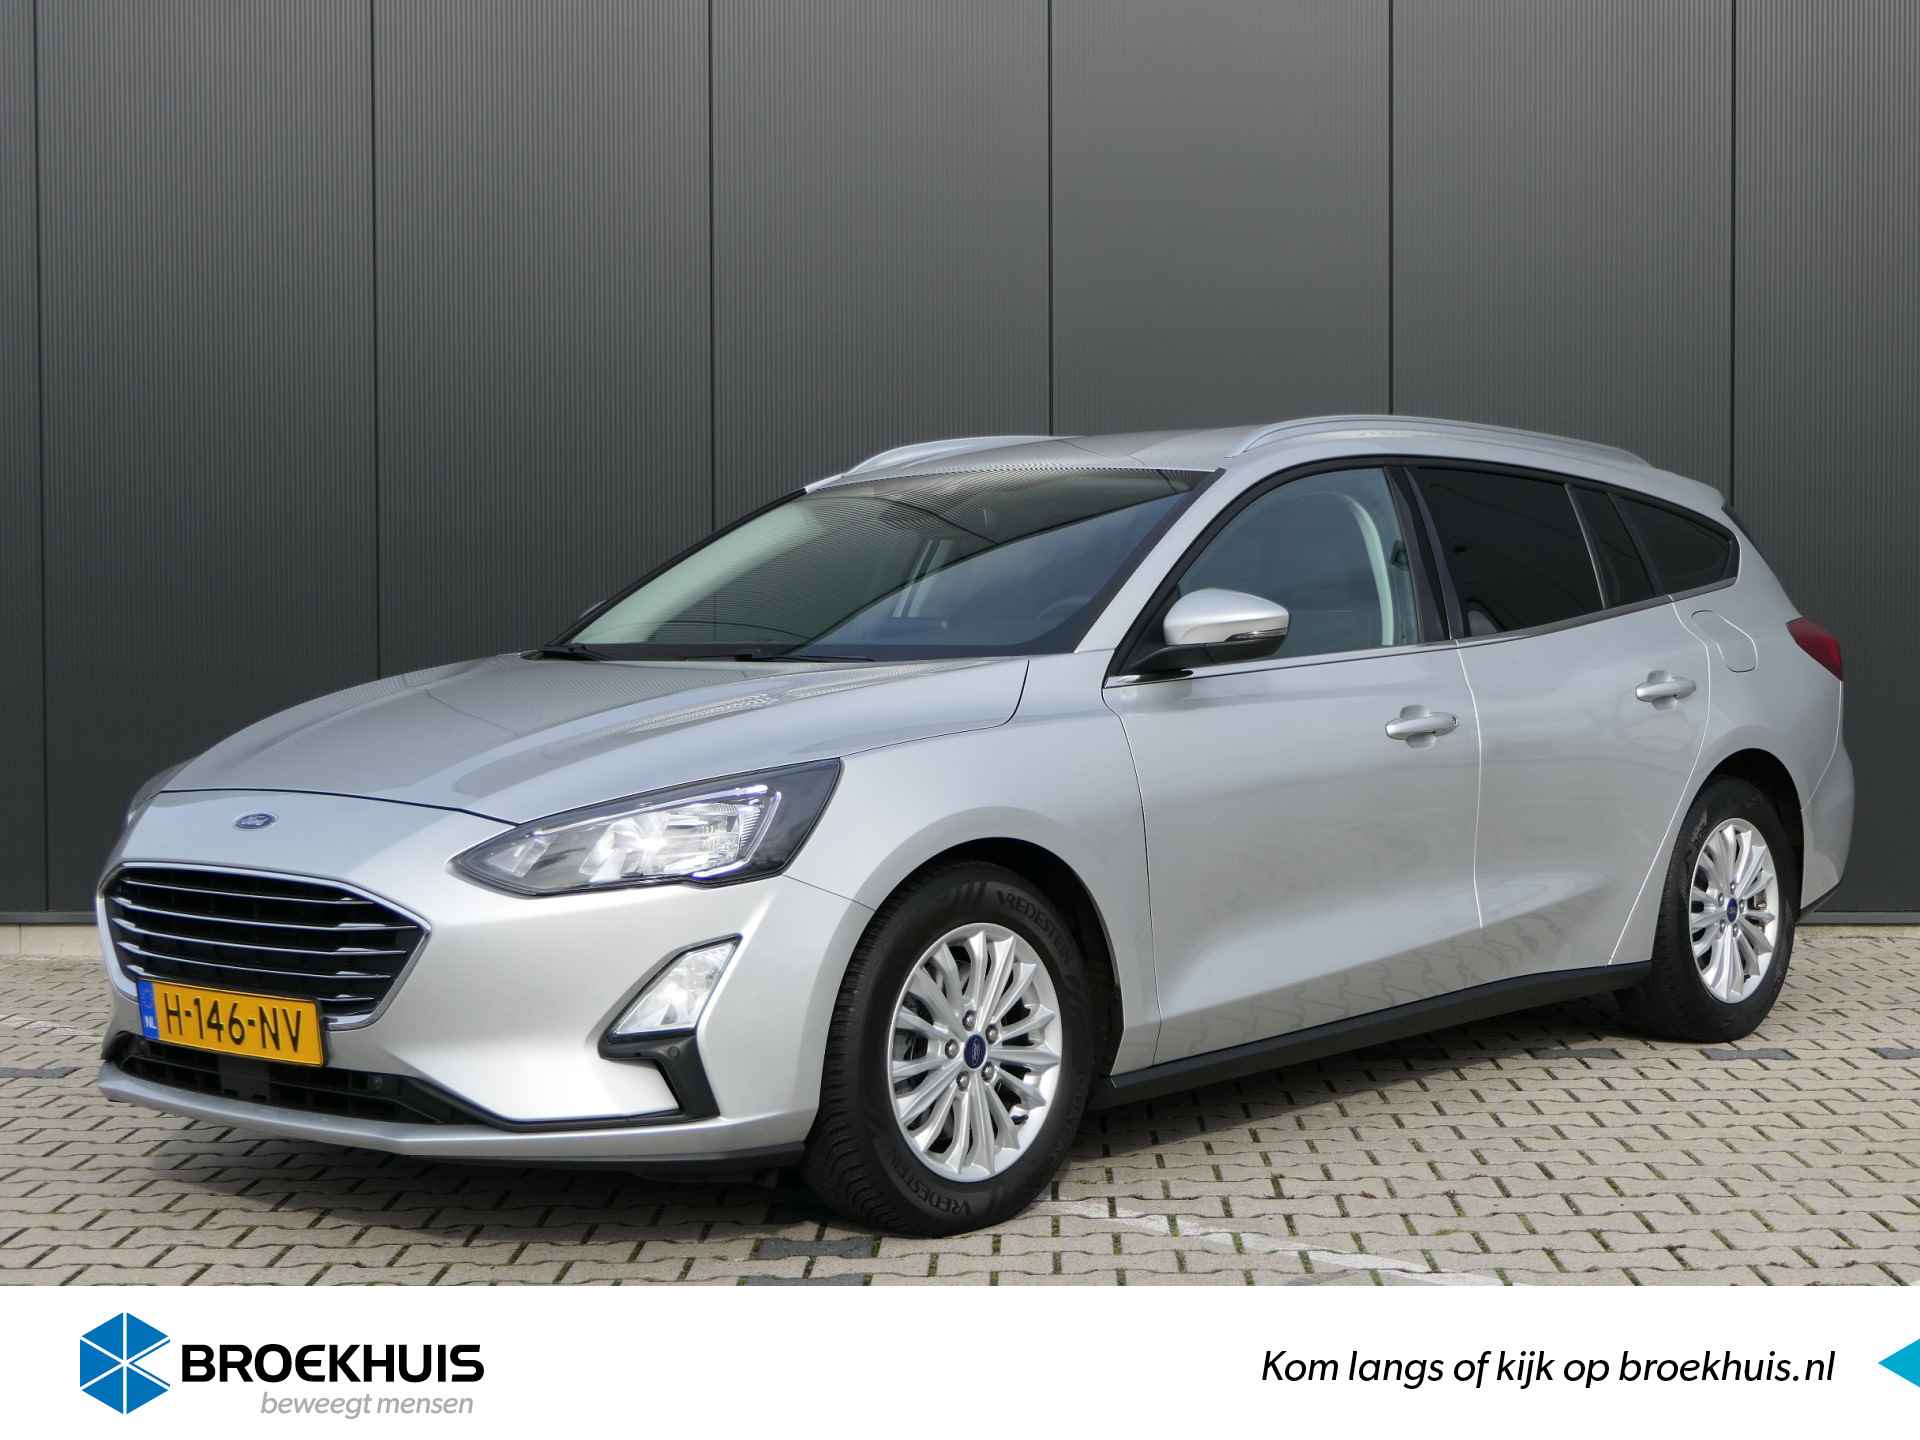 Ford Focus Wagon 1.0 EcoBoost Titanium | Automaat | Lichtmetaal | Navigatie | Climate Control | Keyless Entry | - 1/34